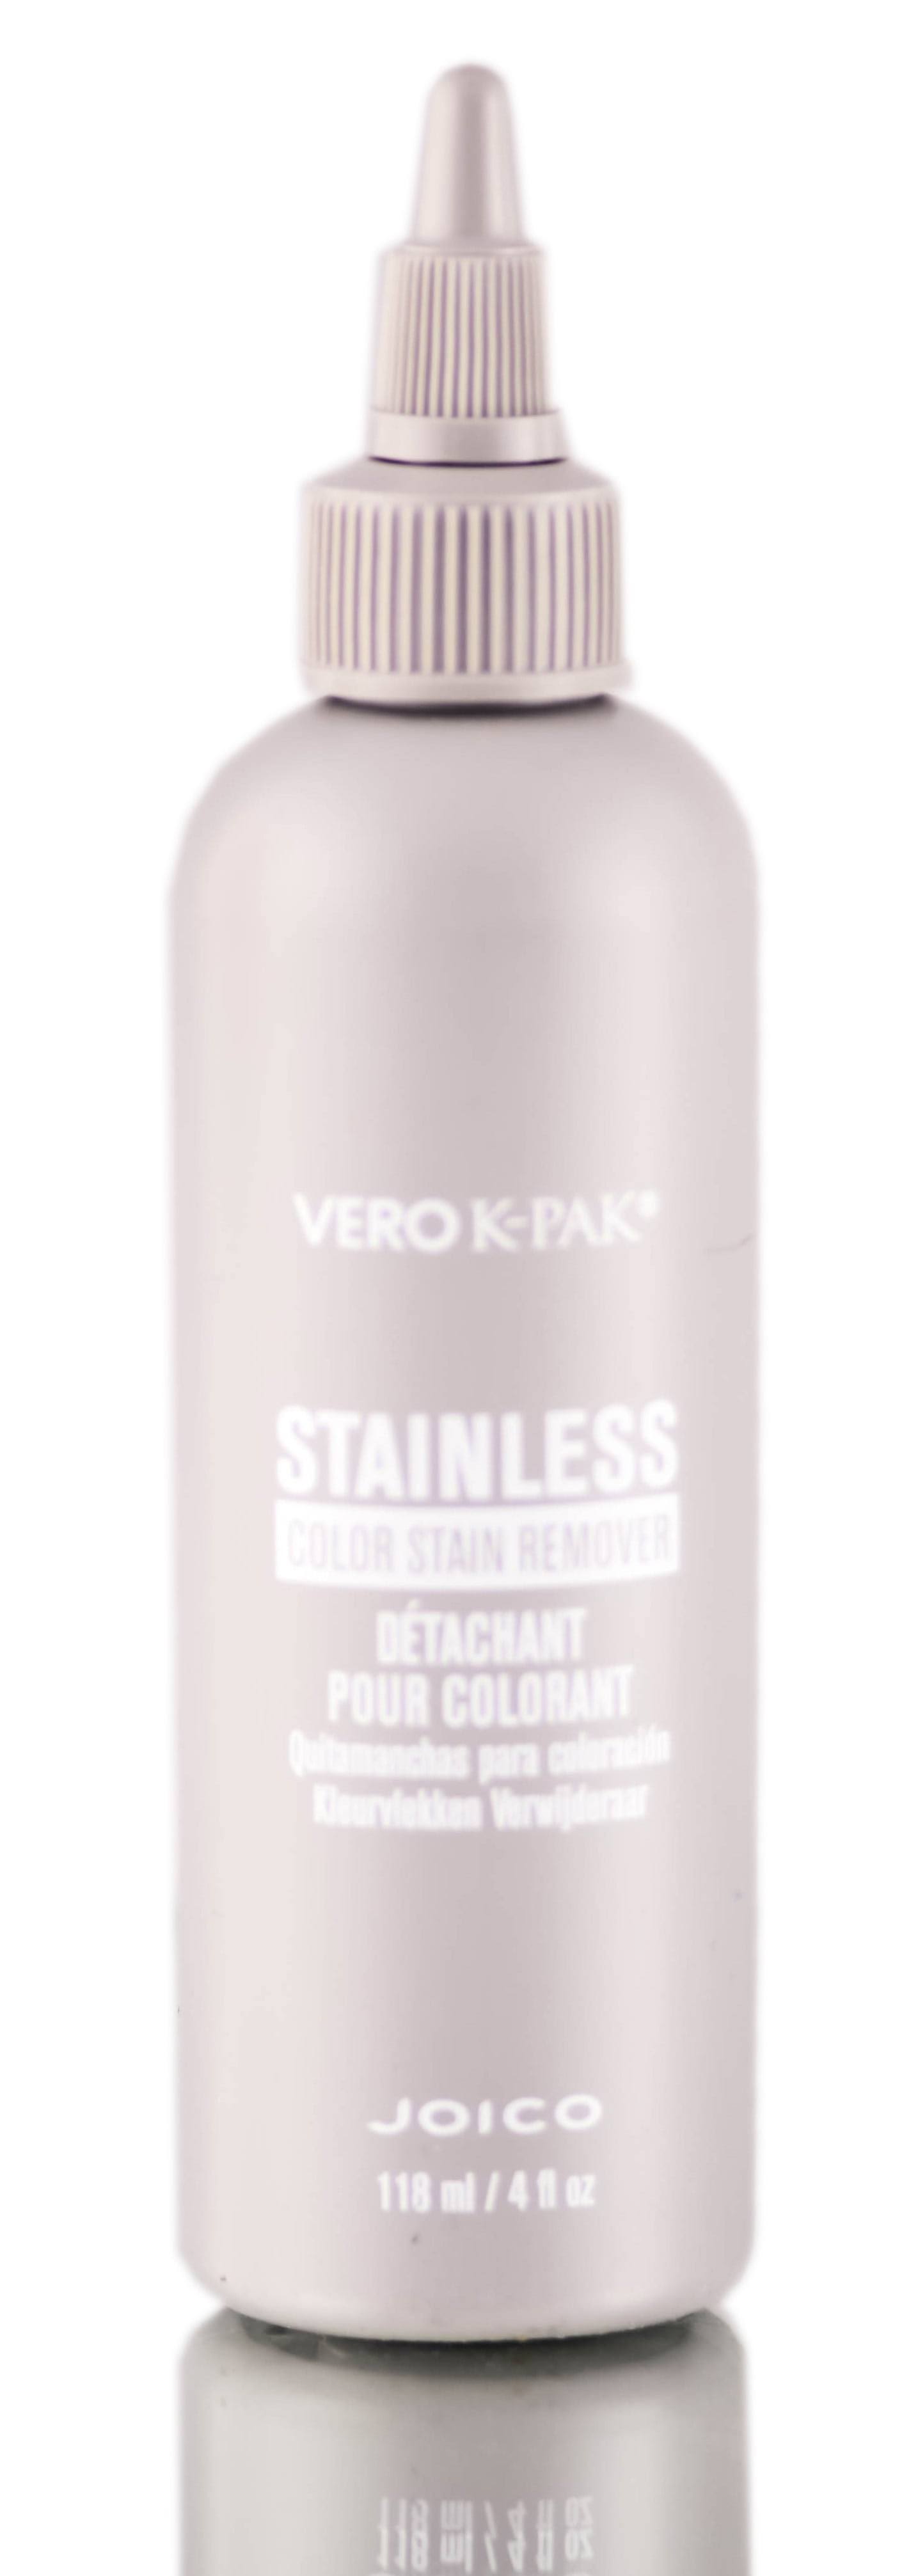 Joico Vero Stainless Color Stain Remover - 4.2oz